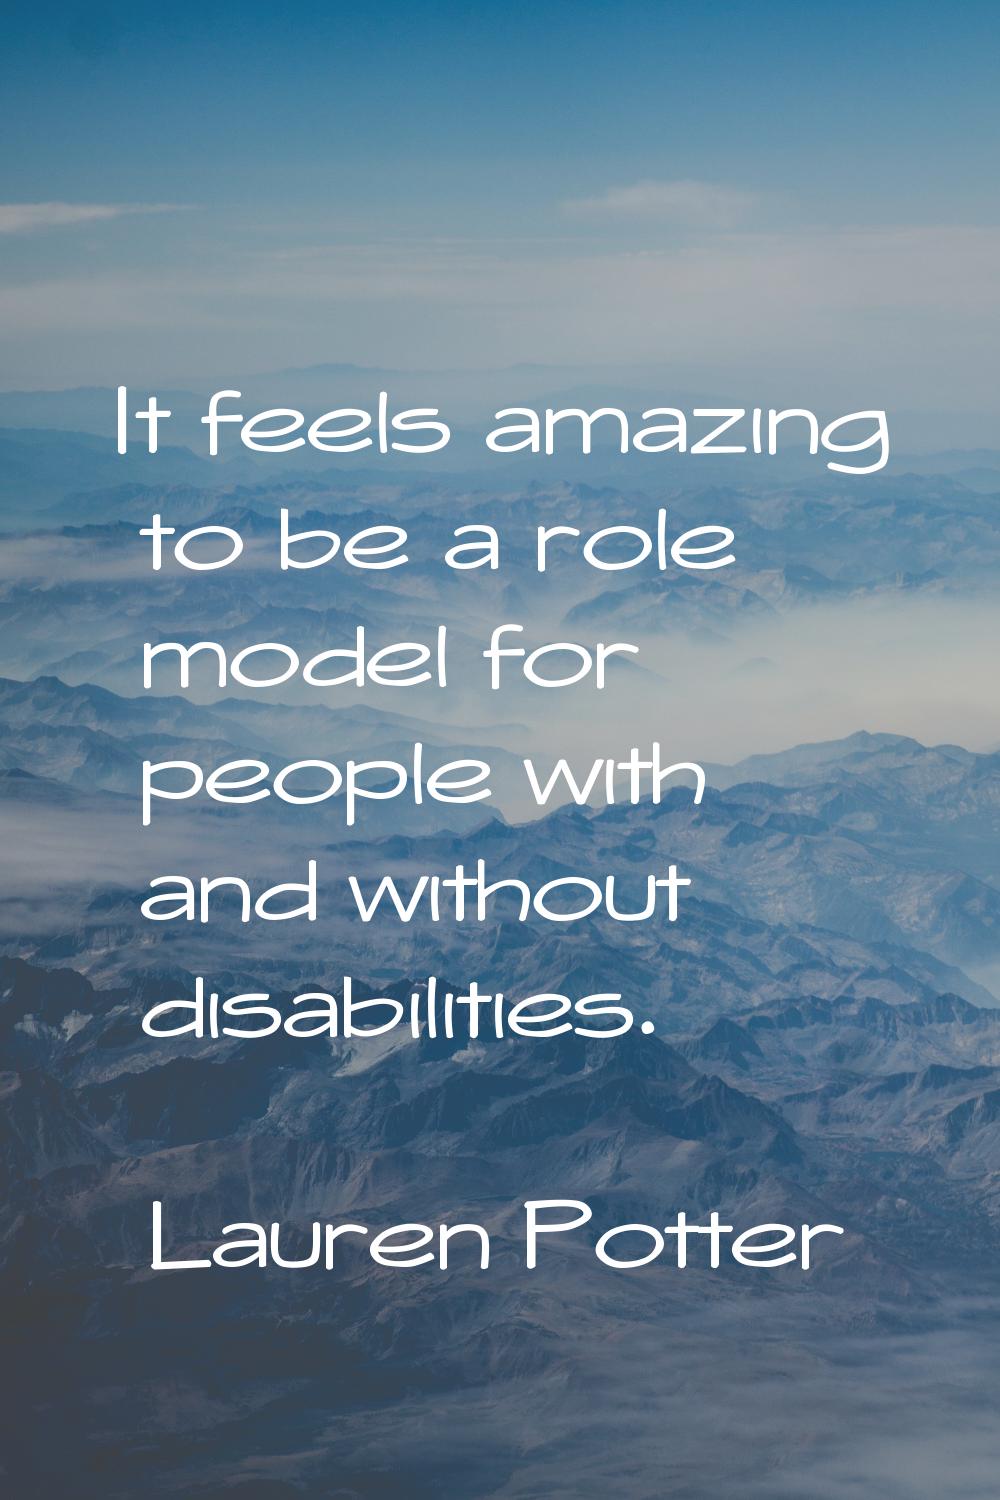 It feels amazing to be a role model for people with and without disabilities.